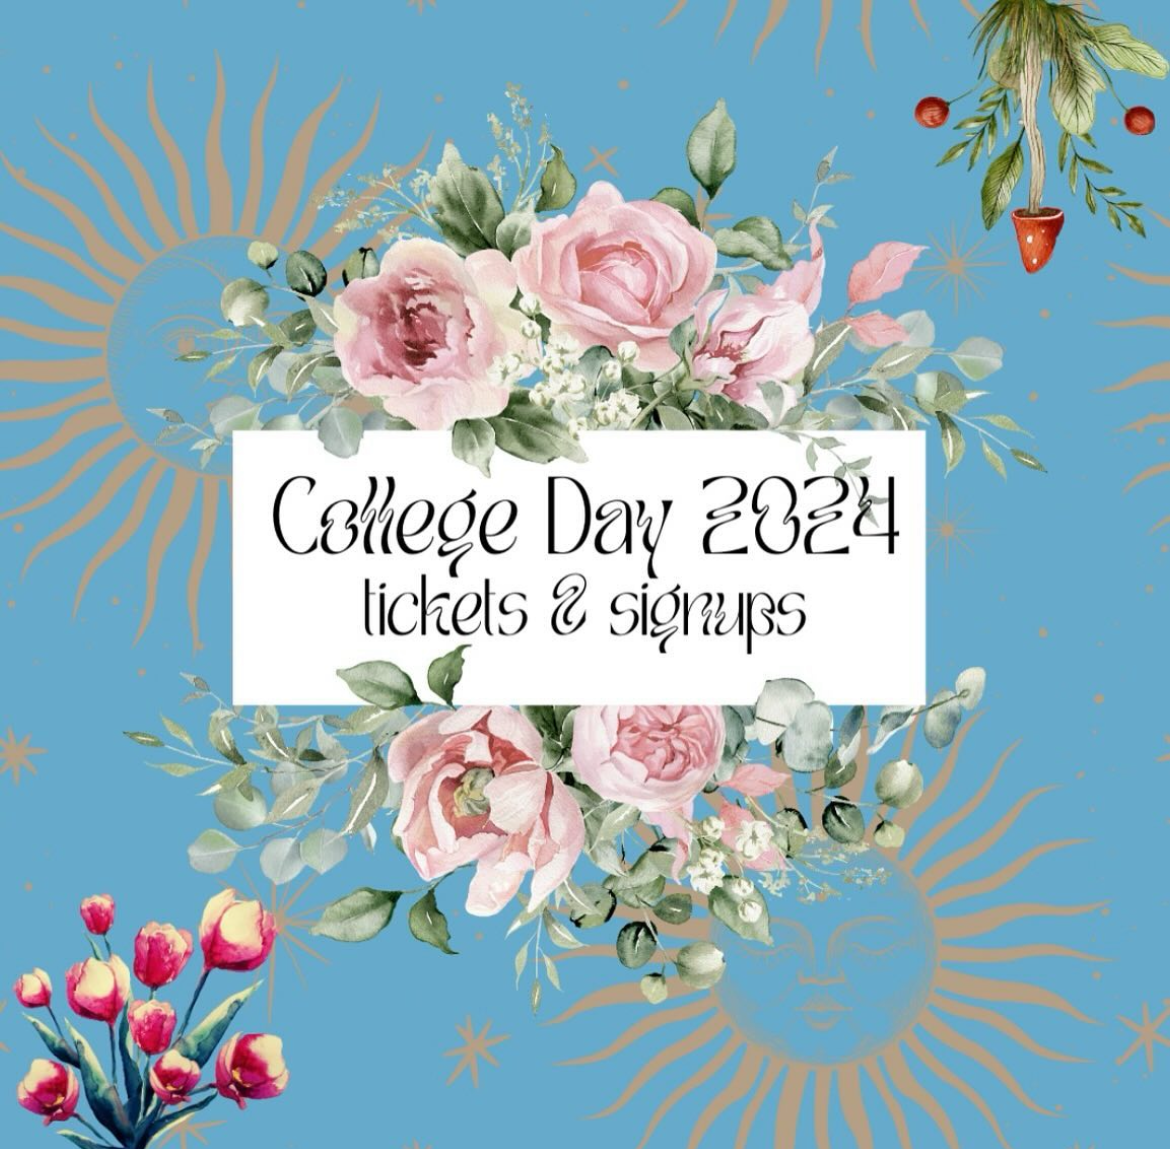 Hild Bede College Day 2024: ENTS ONLY TICKETS